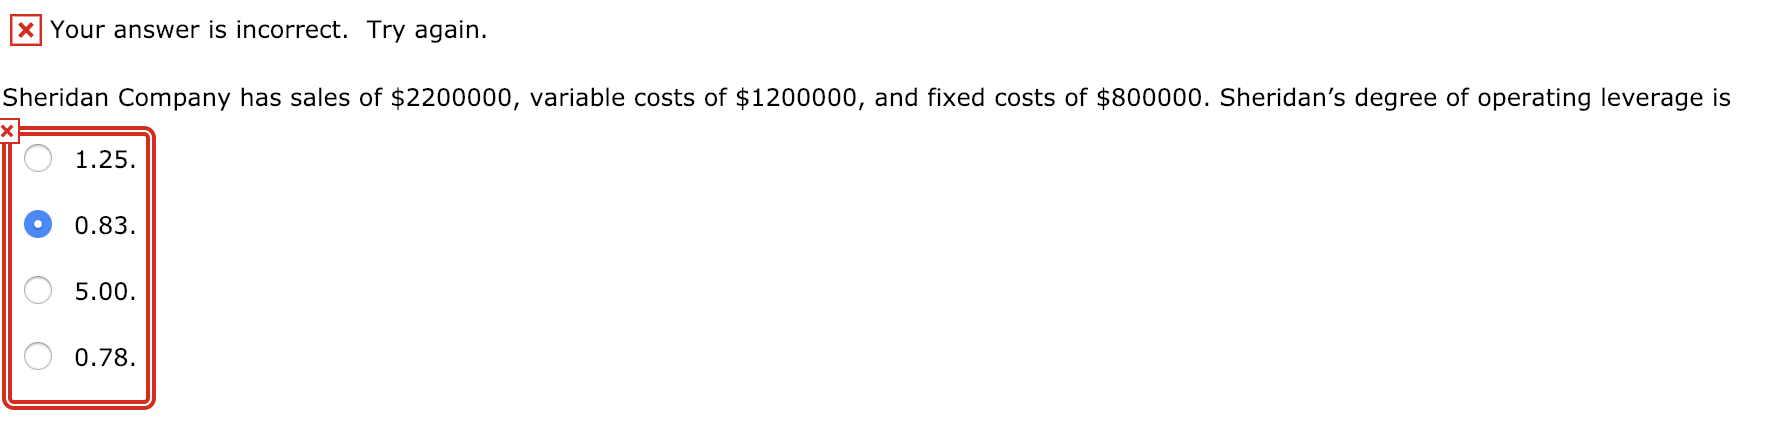 KI Your answer is incorrect. Try again.
Sheridan Company has sales of $2200000, variable costs of $1200000, and fixed costs of $800000. Sheridan's degree of operating leverage is
1.25
0.83
5.00
0.78
